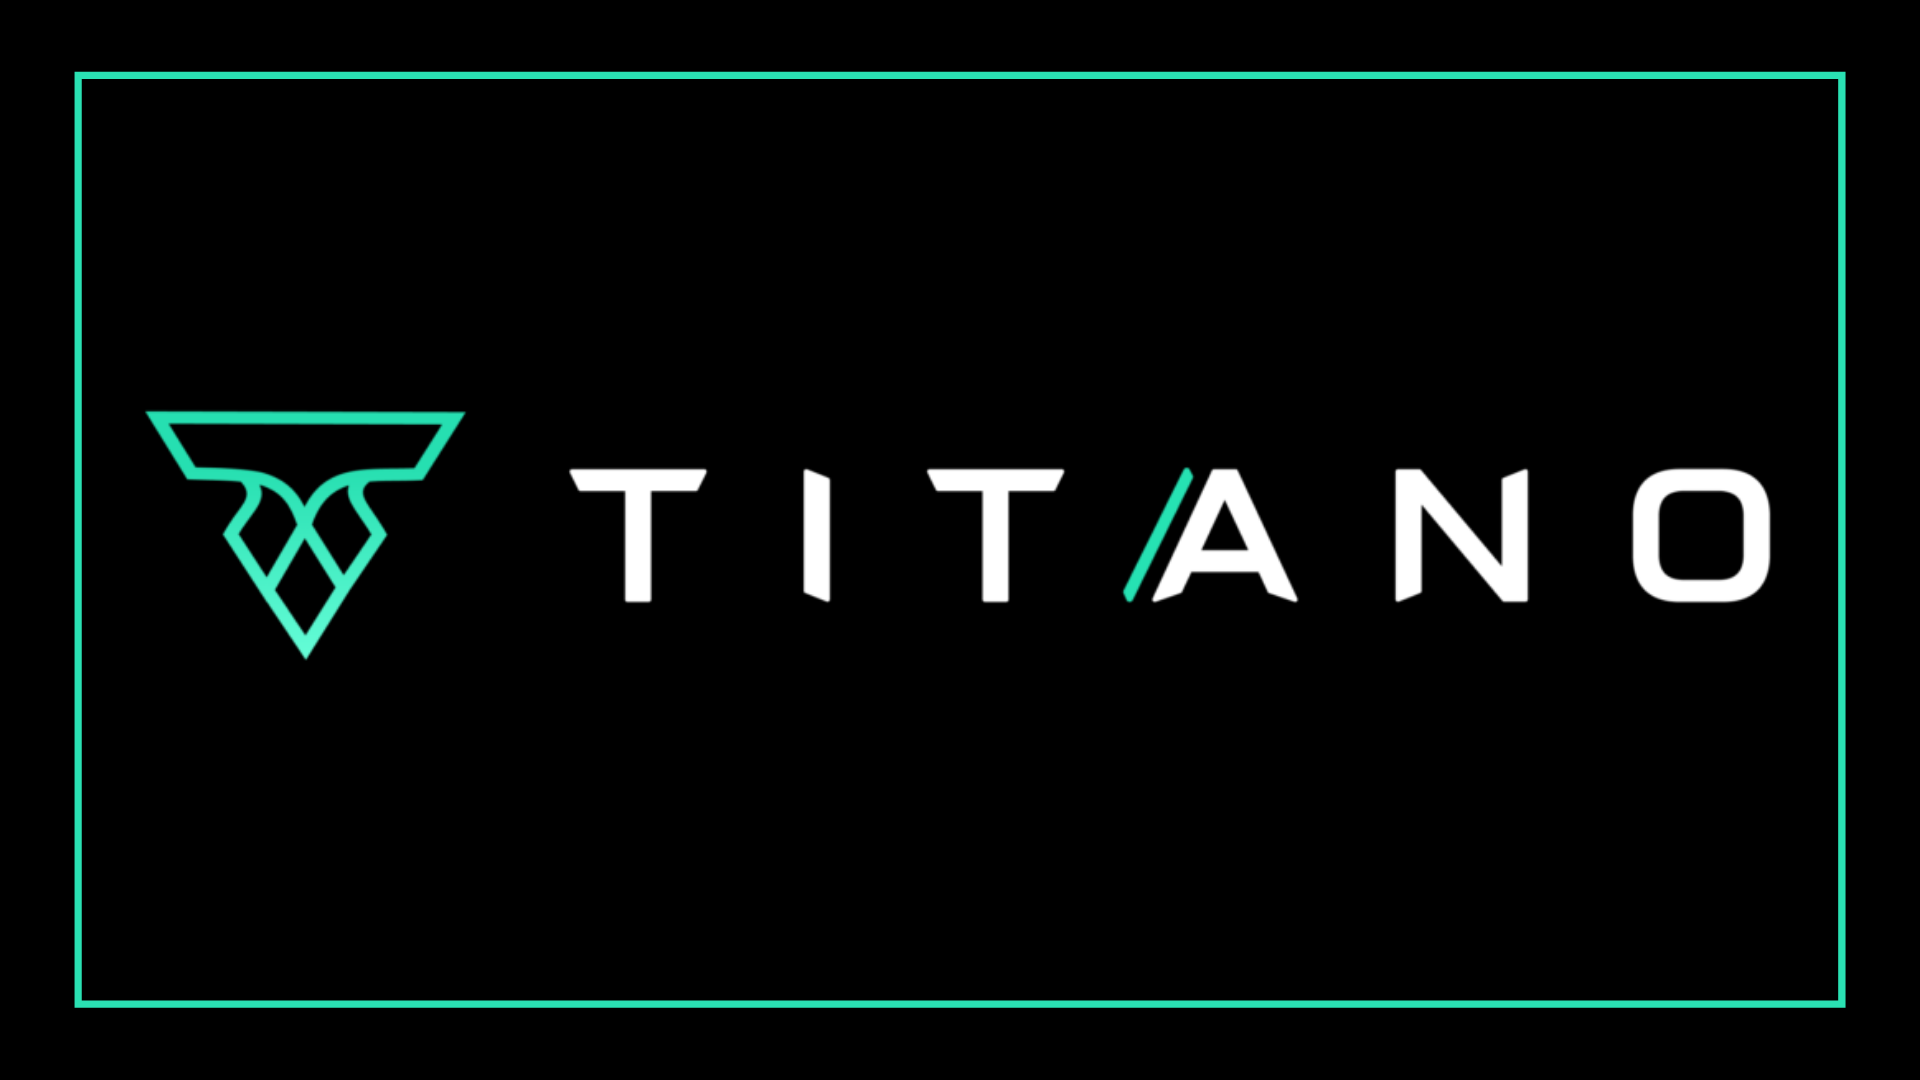 Where and How to Buy Titano Token - Complete Guide